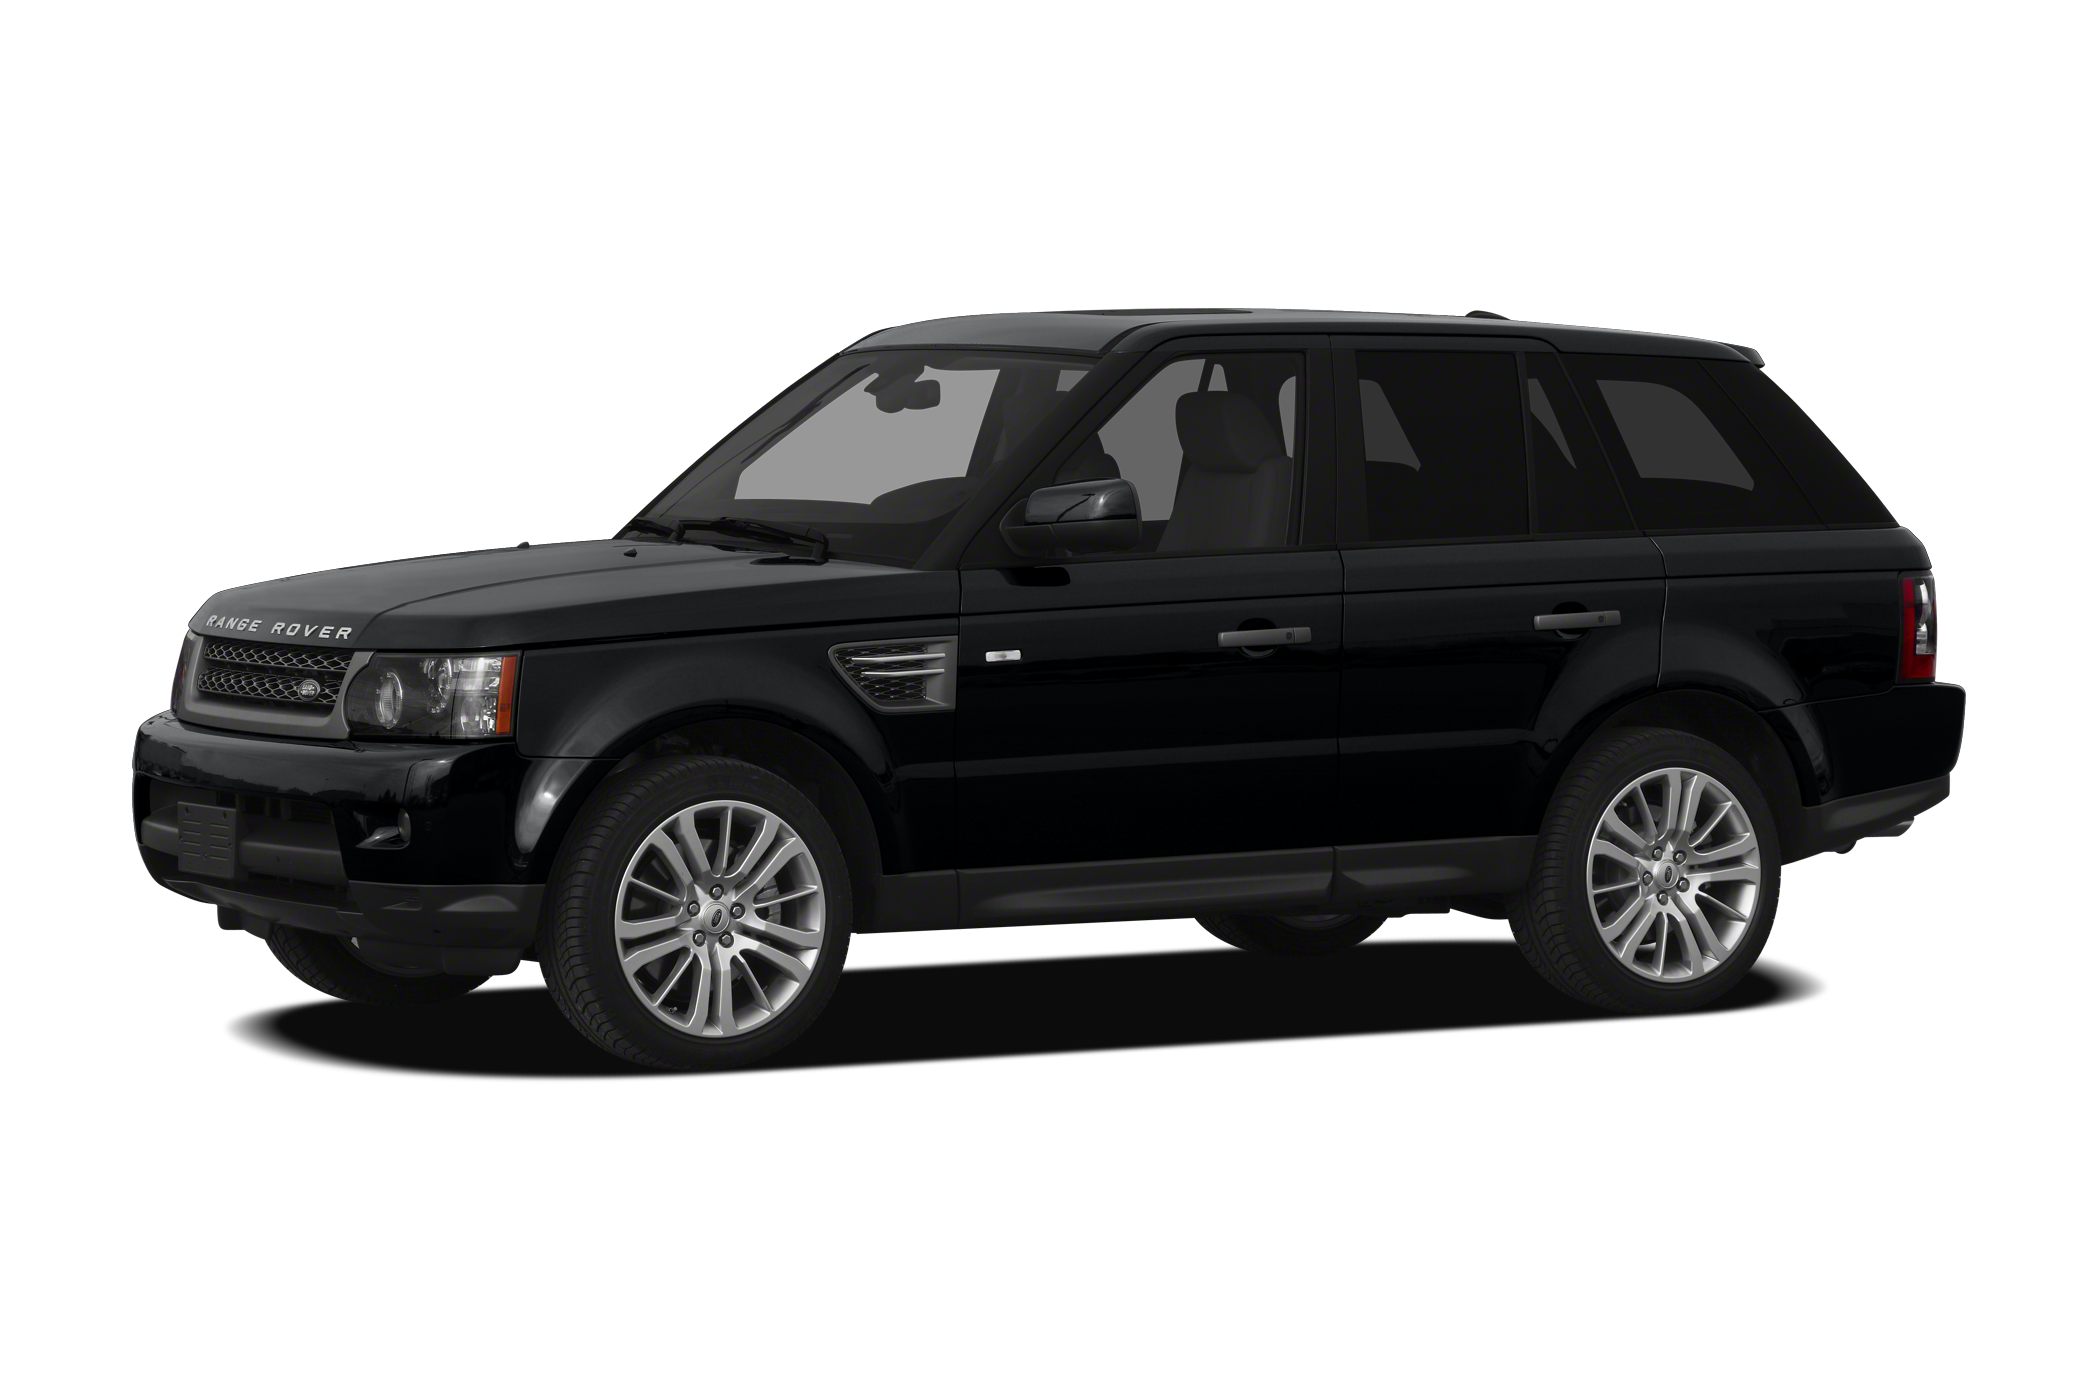 2011 Land Rover Range Rover Sport Hse 4dr All Wheel Drive Pictures